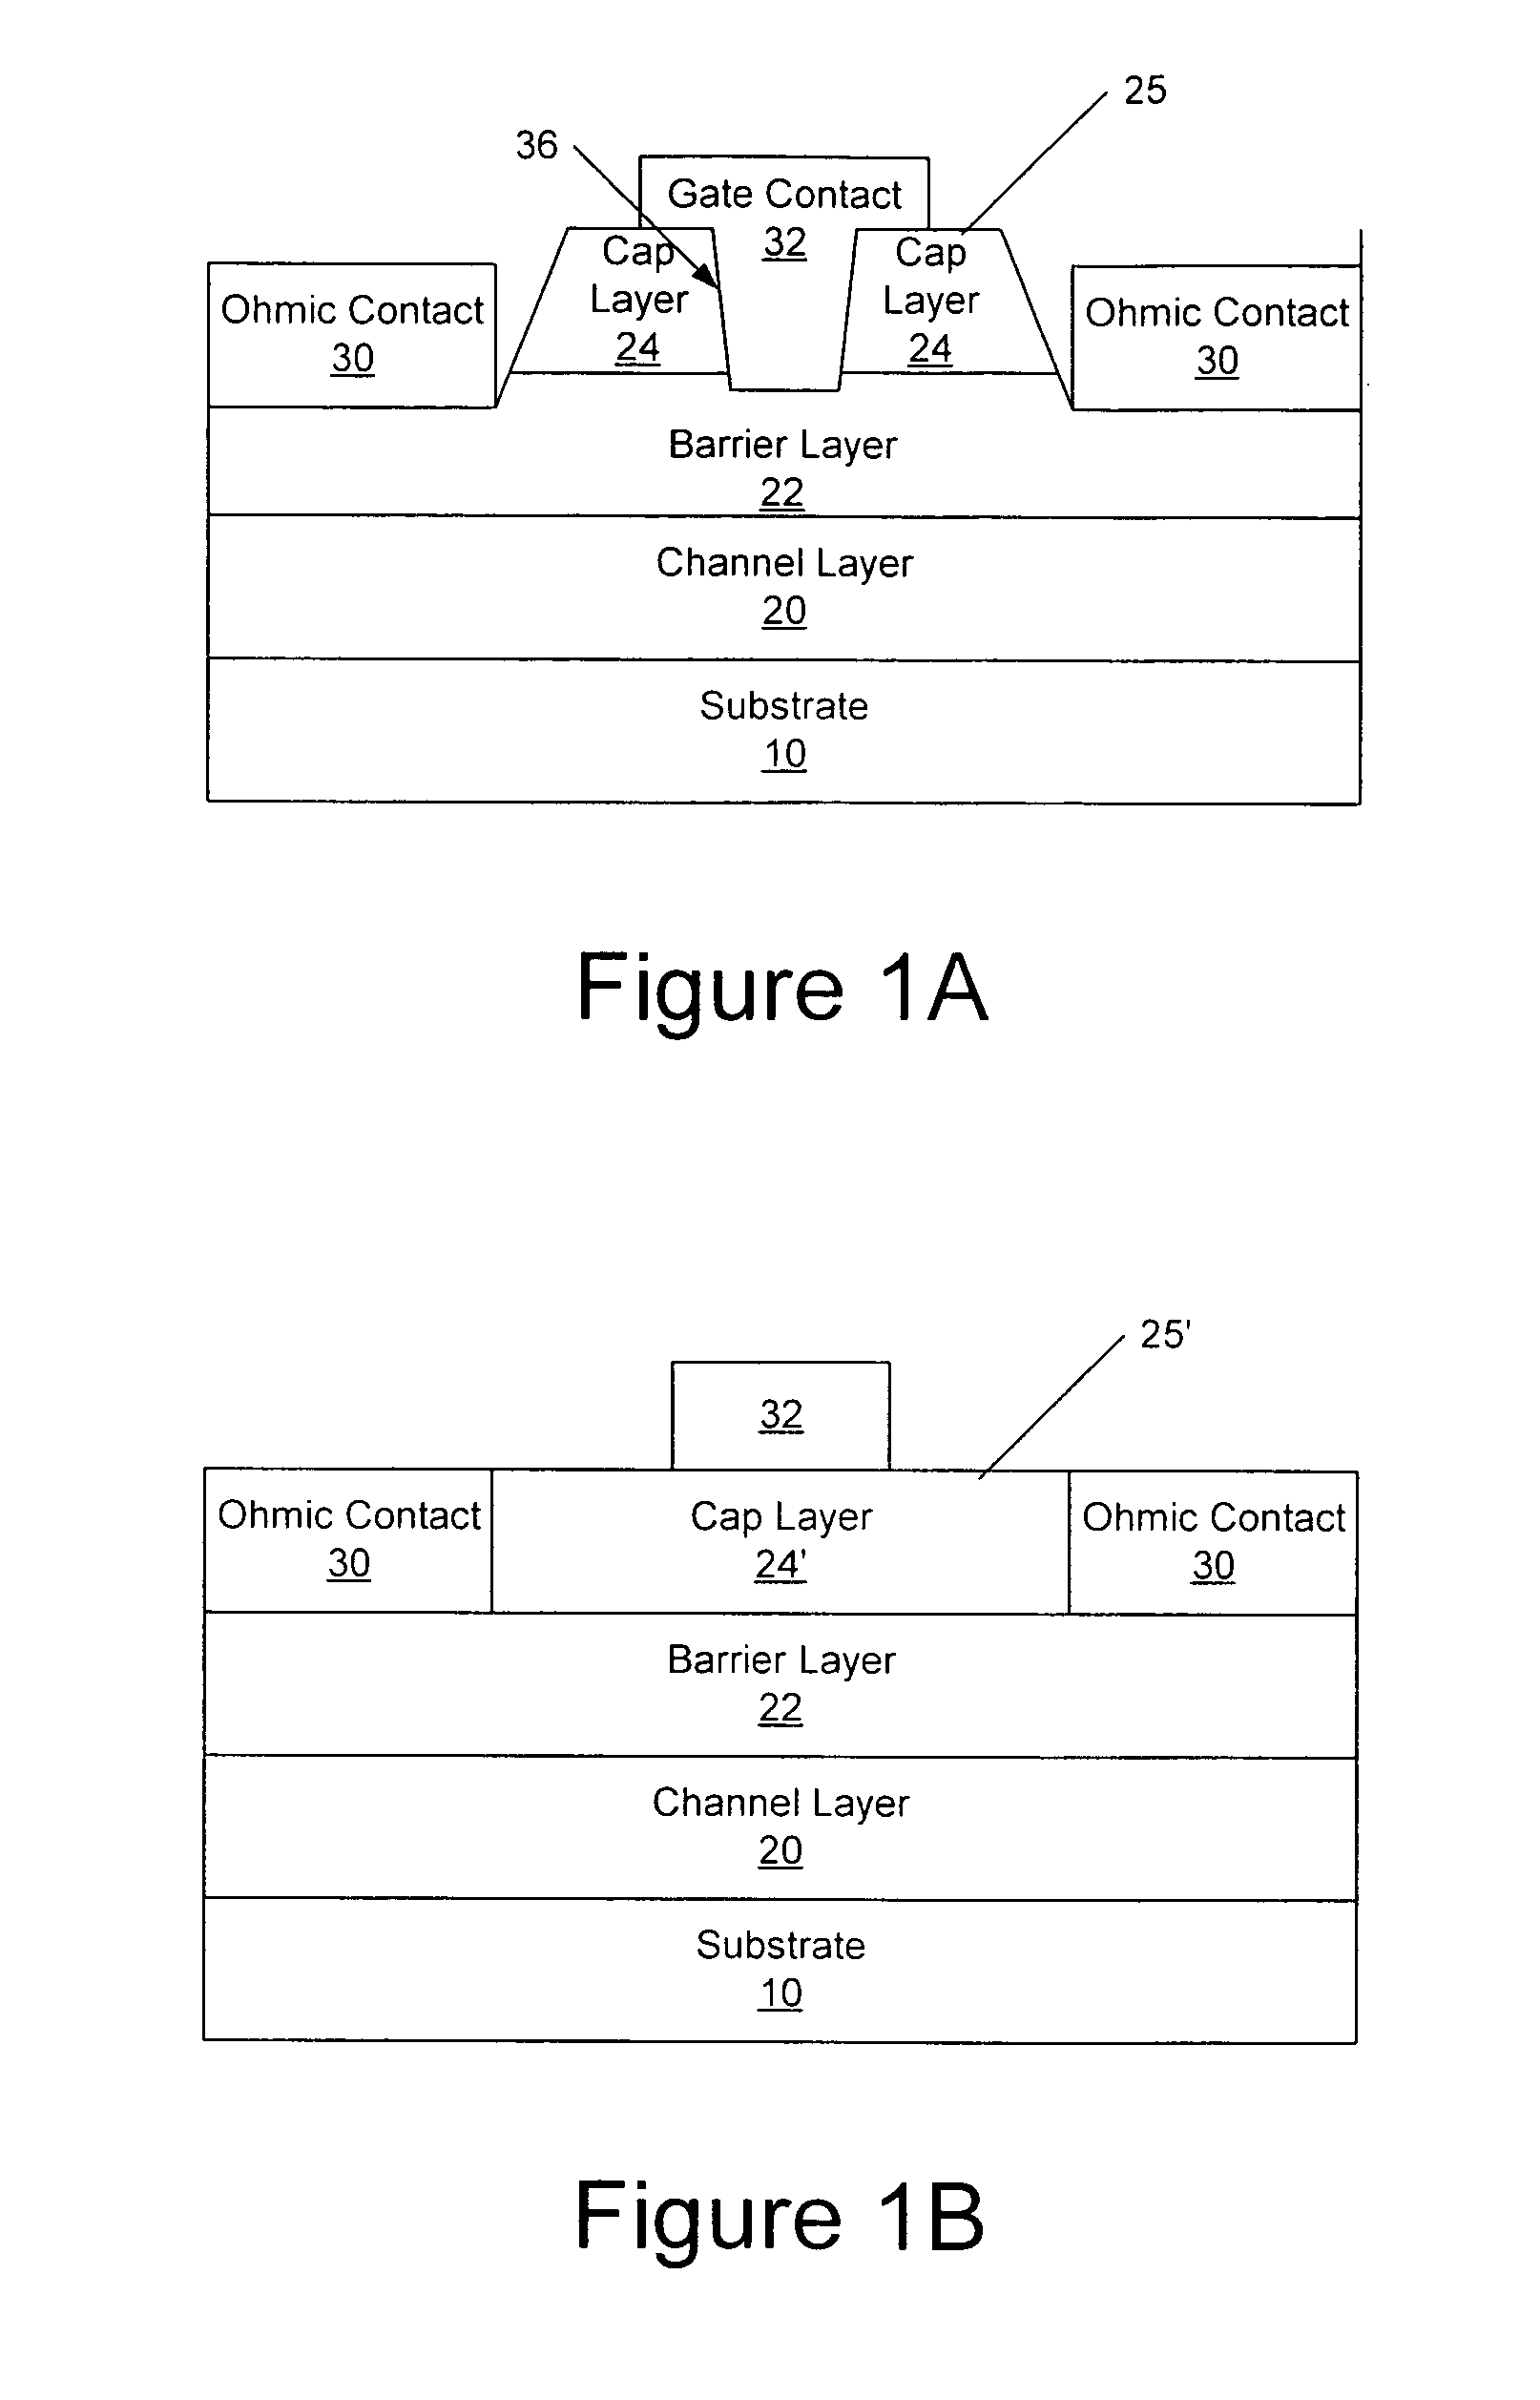 Cap layers and/or passivation layers for nitride-based transistors, transistor structures and methods of fabricating same